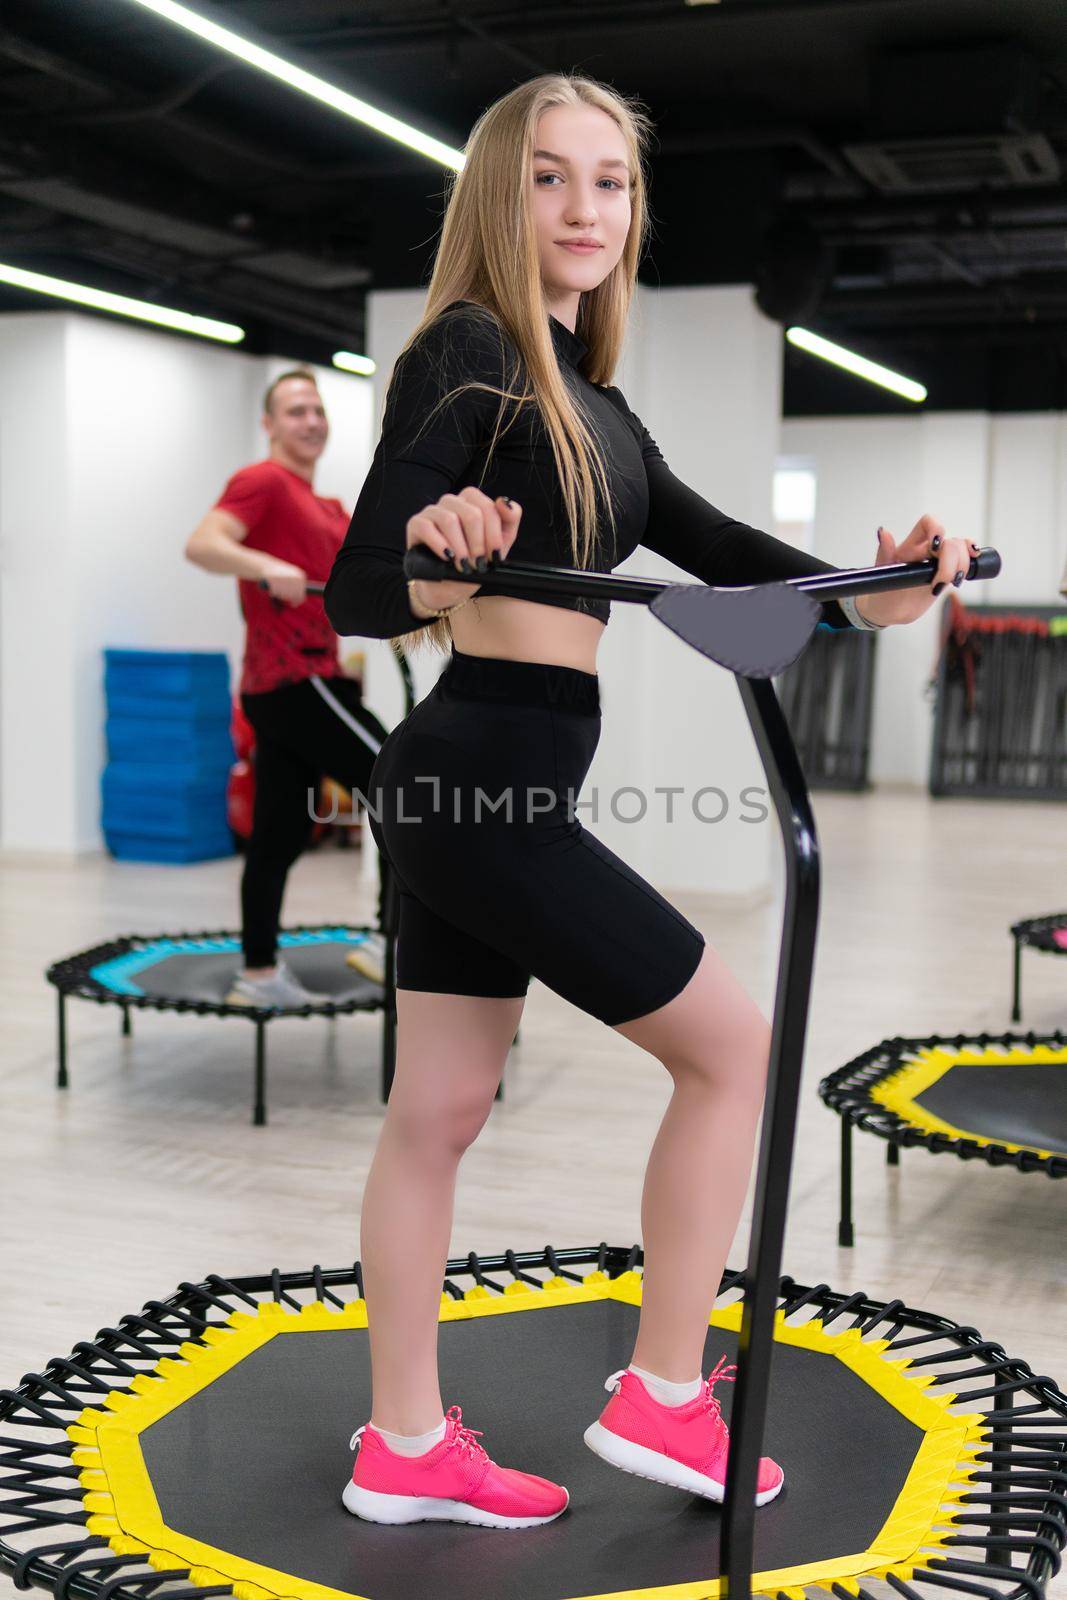 Beautiful girl on a yellow trampoline, in red sneakers stands in the gym. Women's and men's group on a sports trampoline, fitness training, healthy life - a concept trampoline group batut instructor men, from female athletic in sporty and sport motion, shape sportswear. Legs beauty athlete by 89167702191